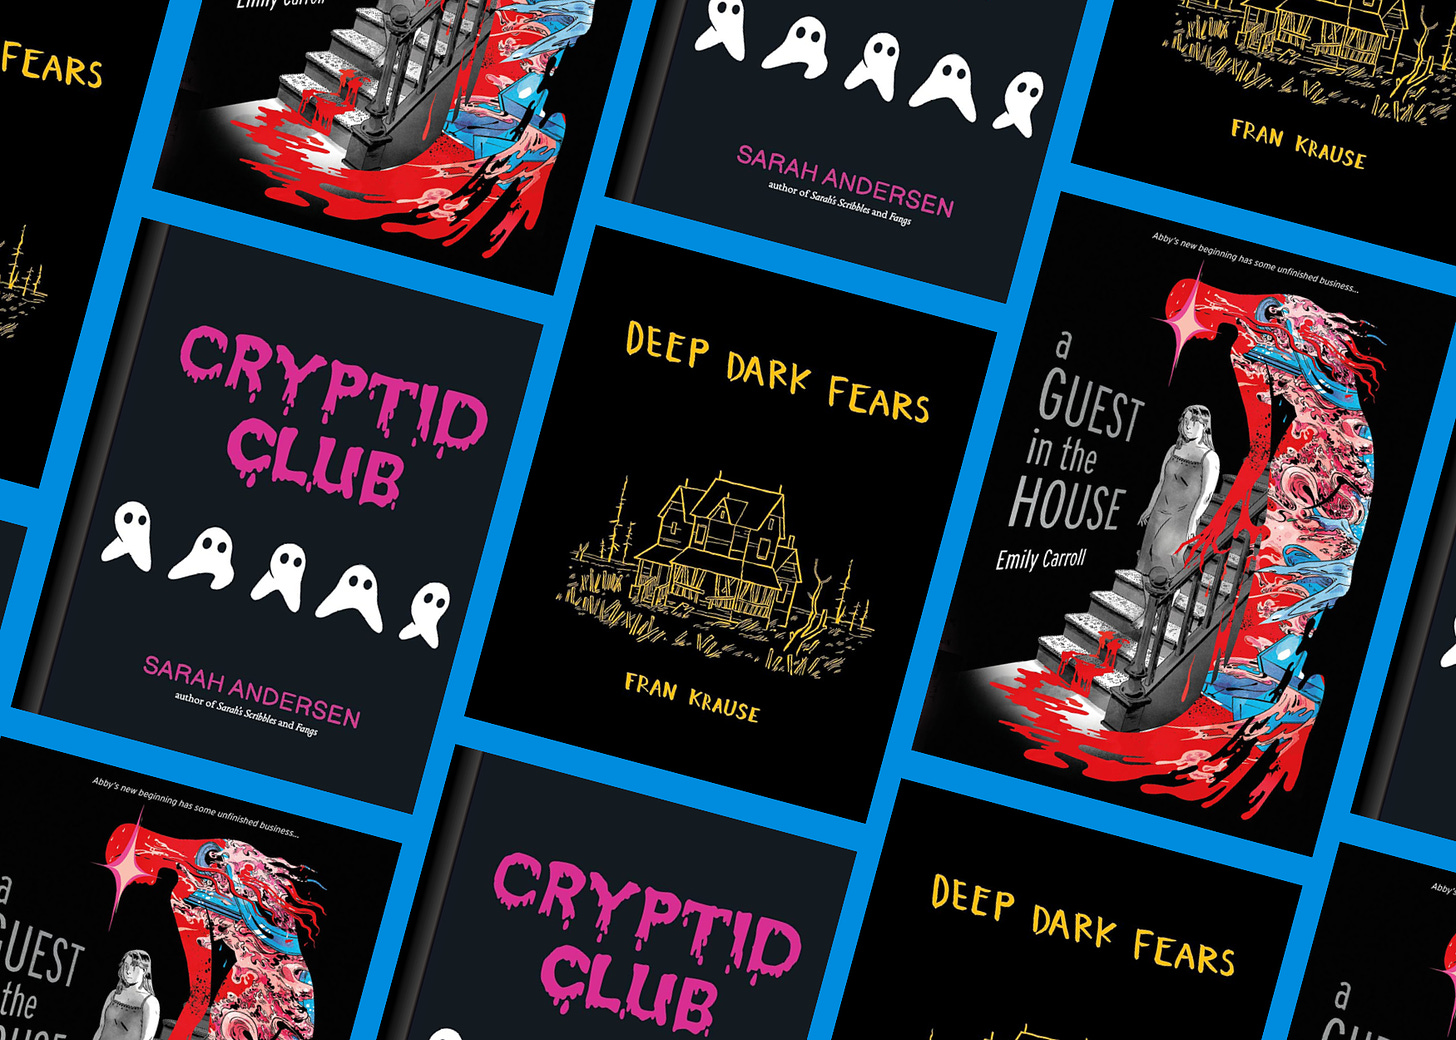 A grid of book covers for spoopy comics: Cryptid Club by Sarah Andersen, Deep Dark Fears by Fran Krause, and A Guest in the House by Emily Carroll.